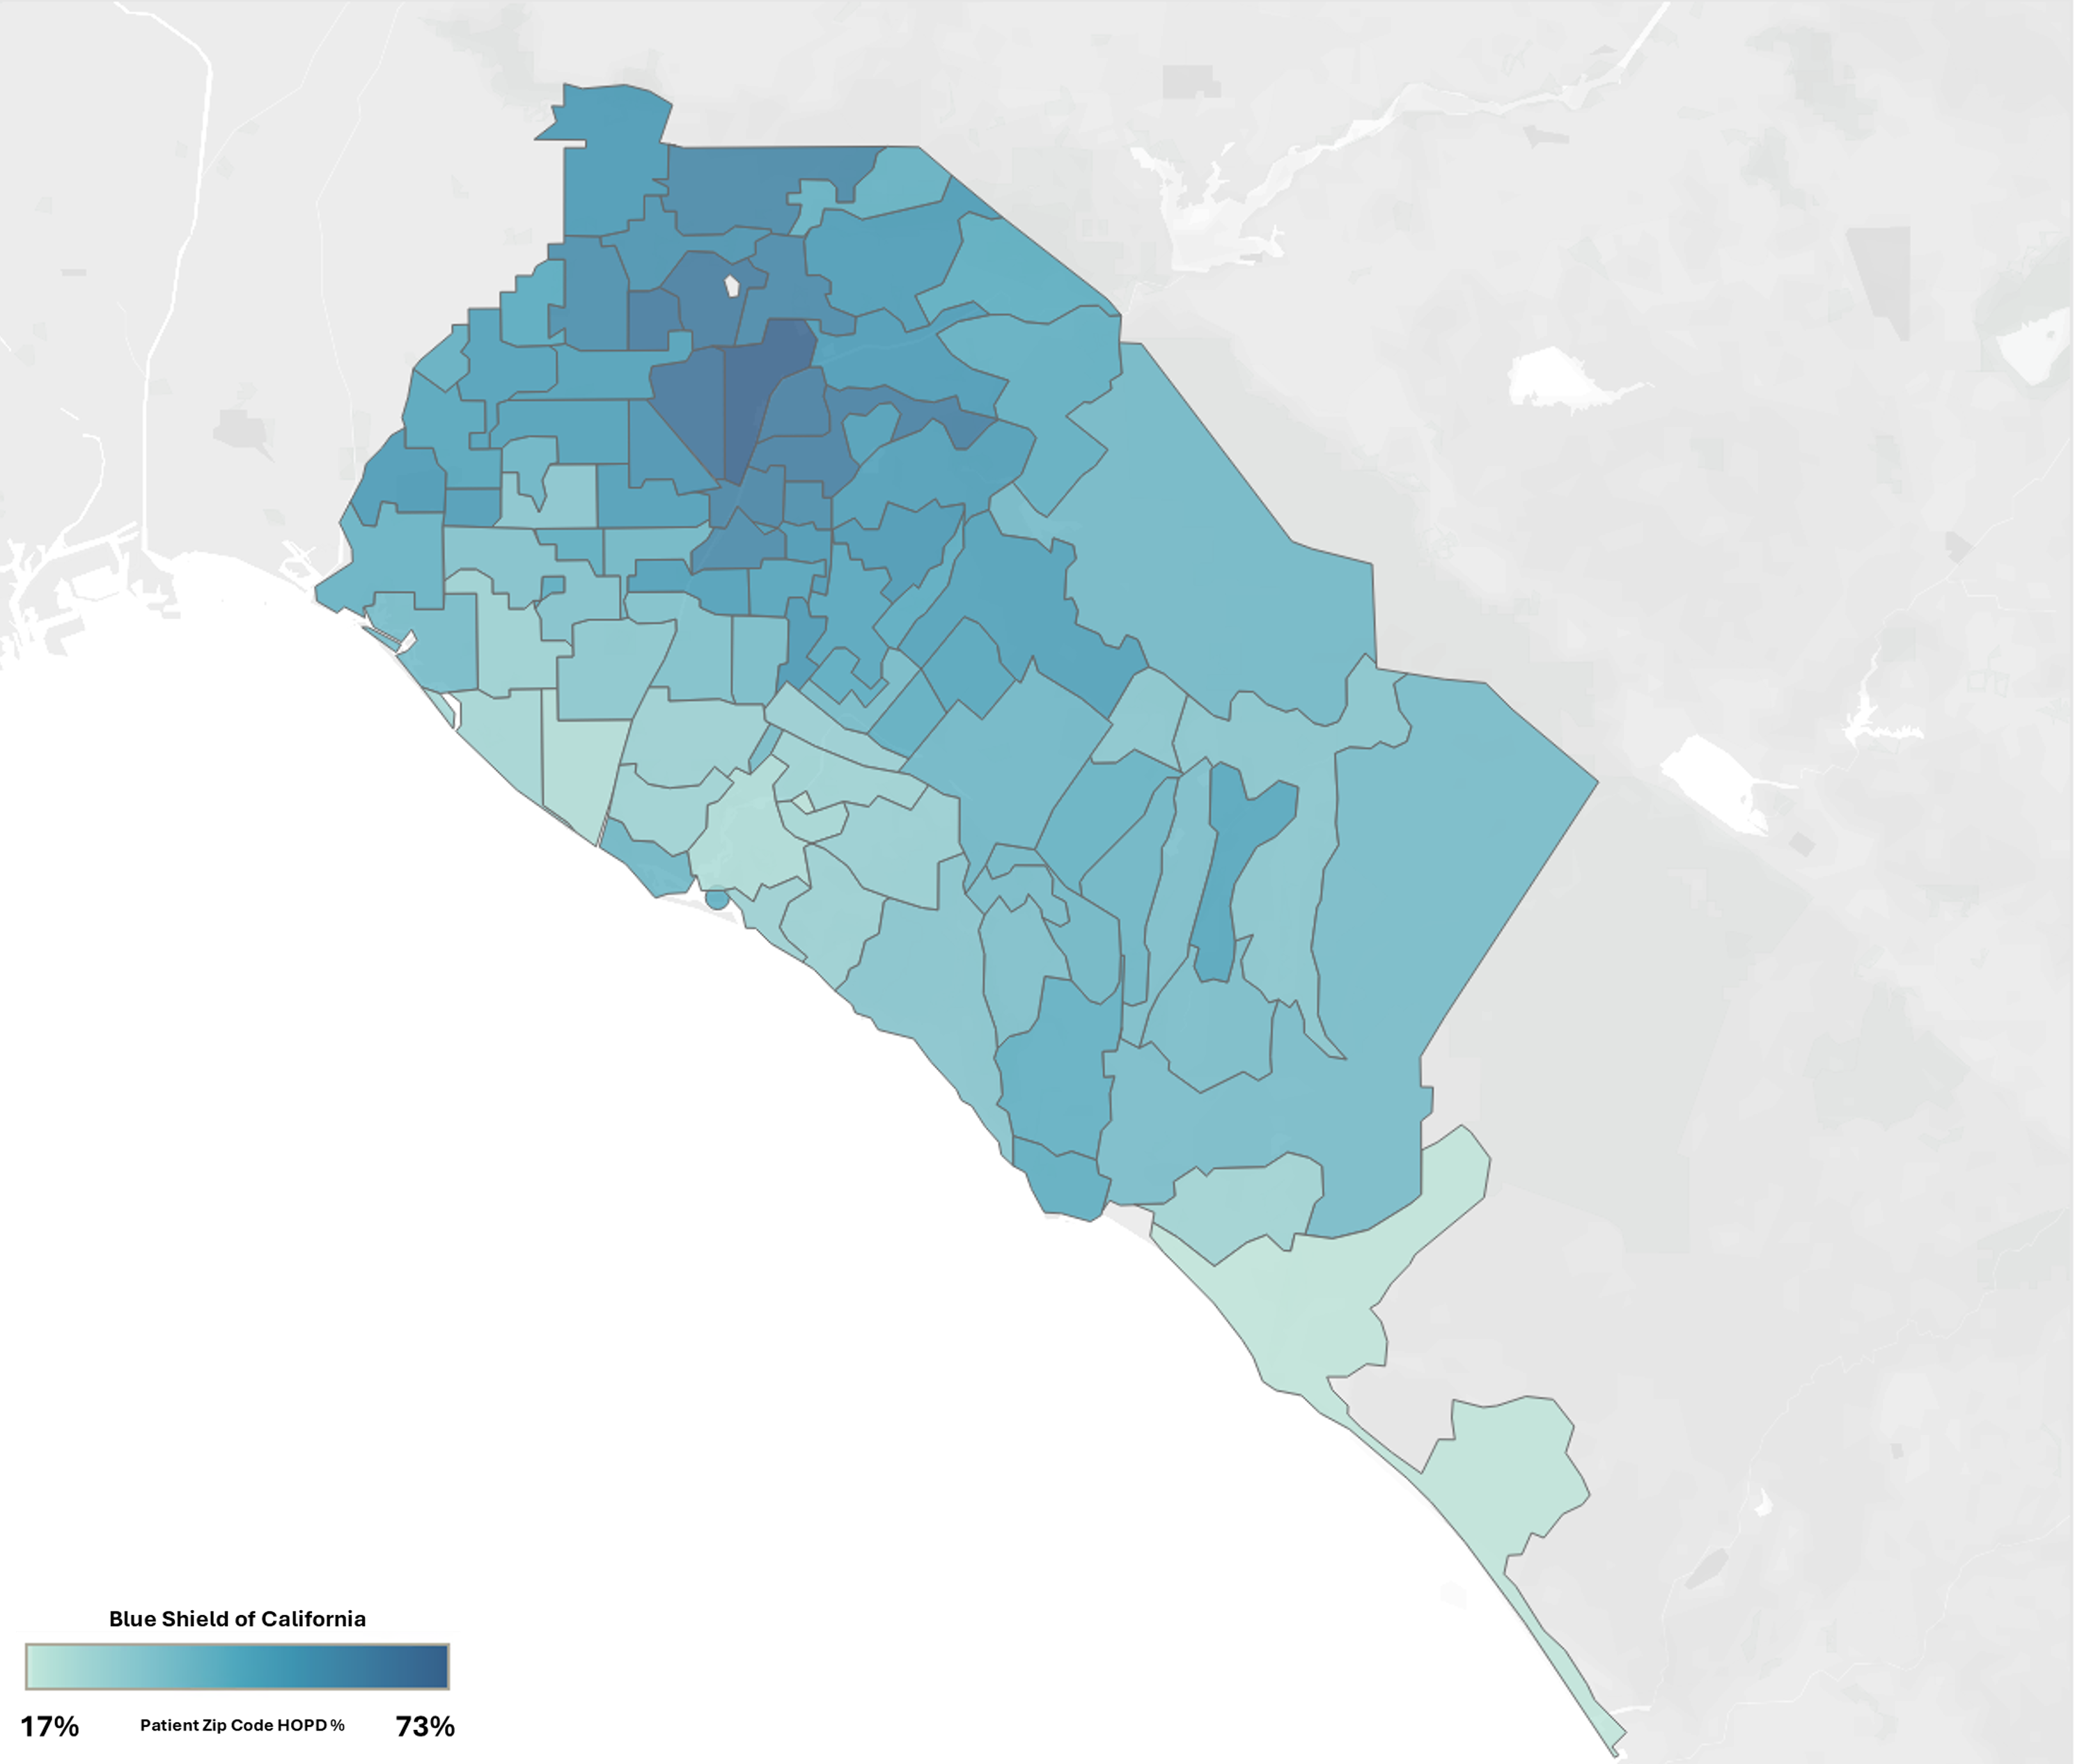 A choropleth map of the Los Angeles market, showing HOPD utilization by ZIP code.